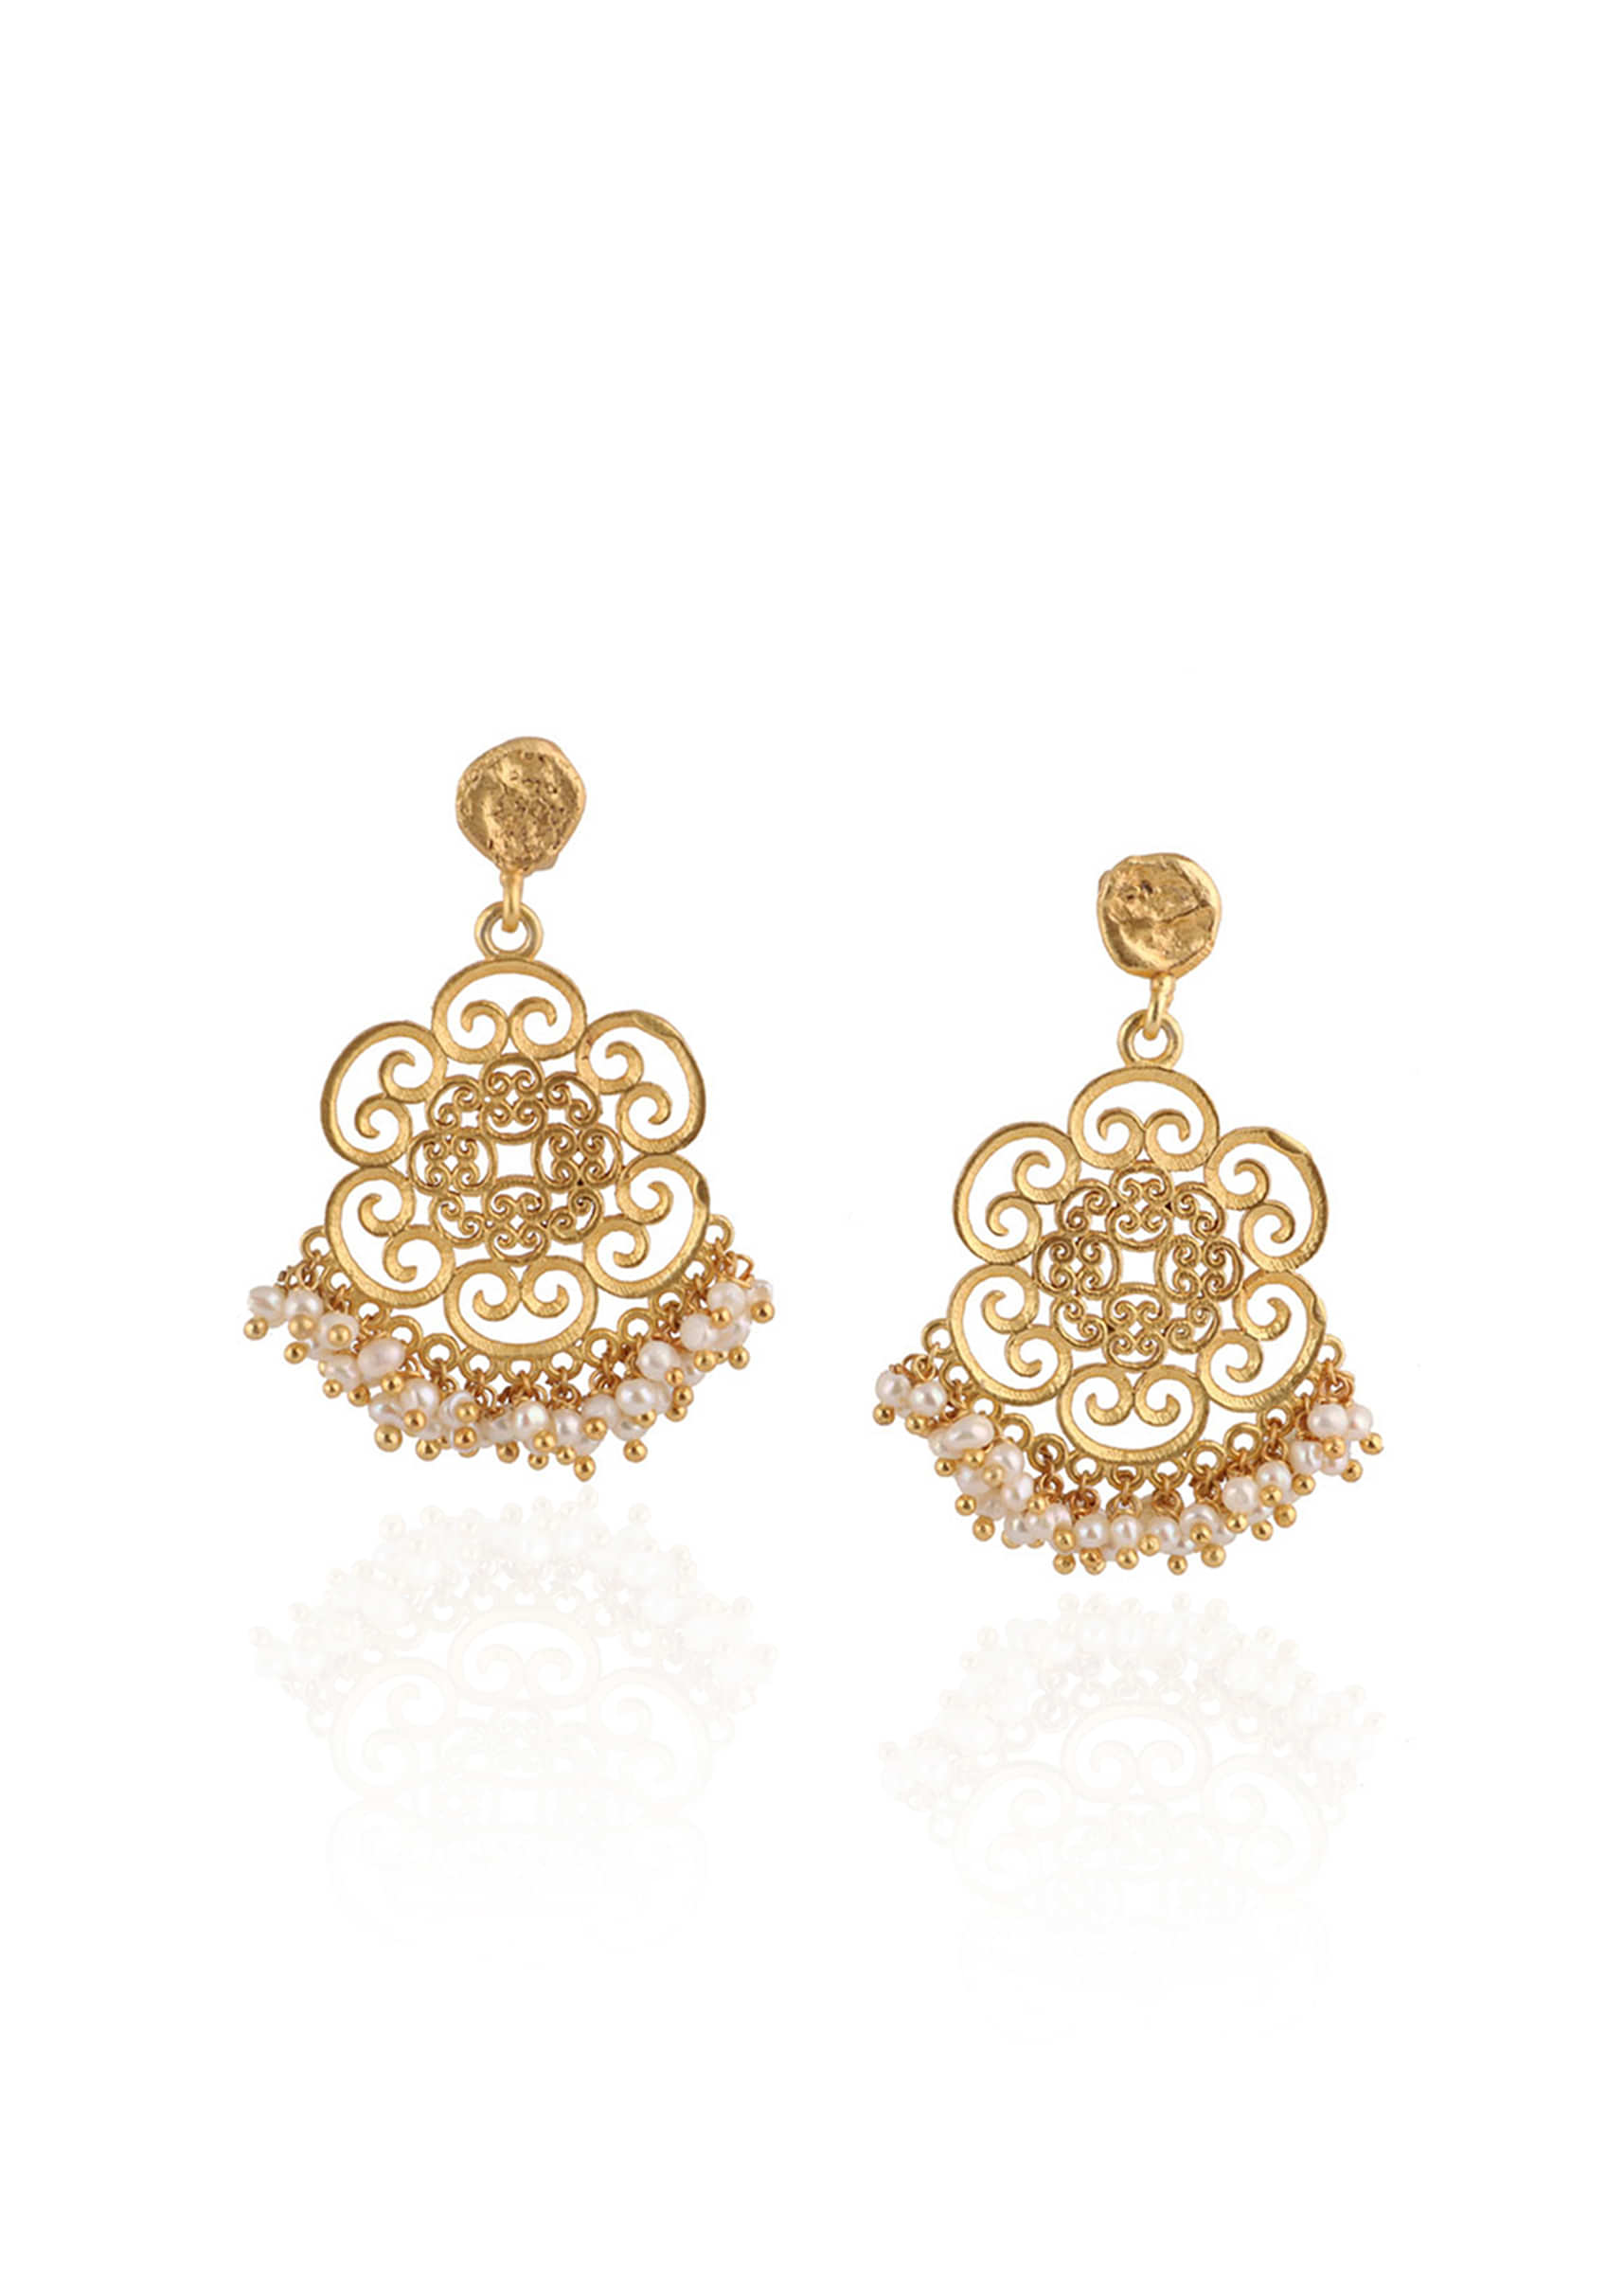 Gold Plated Floral Earrings With Beautiful Filigree Motifs And Pearl Beads By Zariin